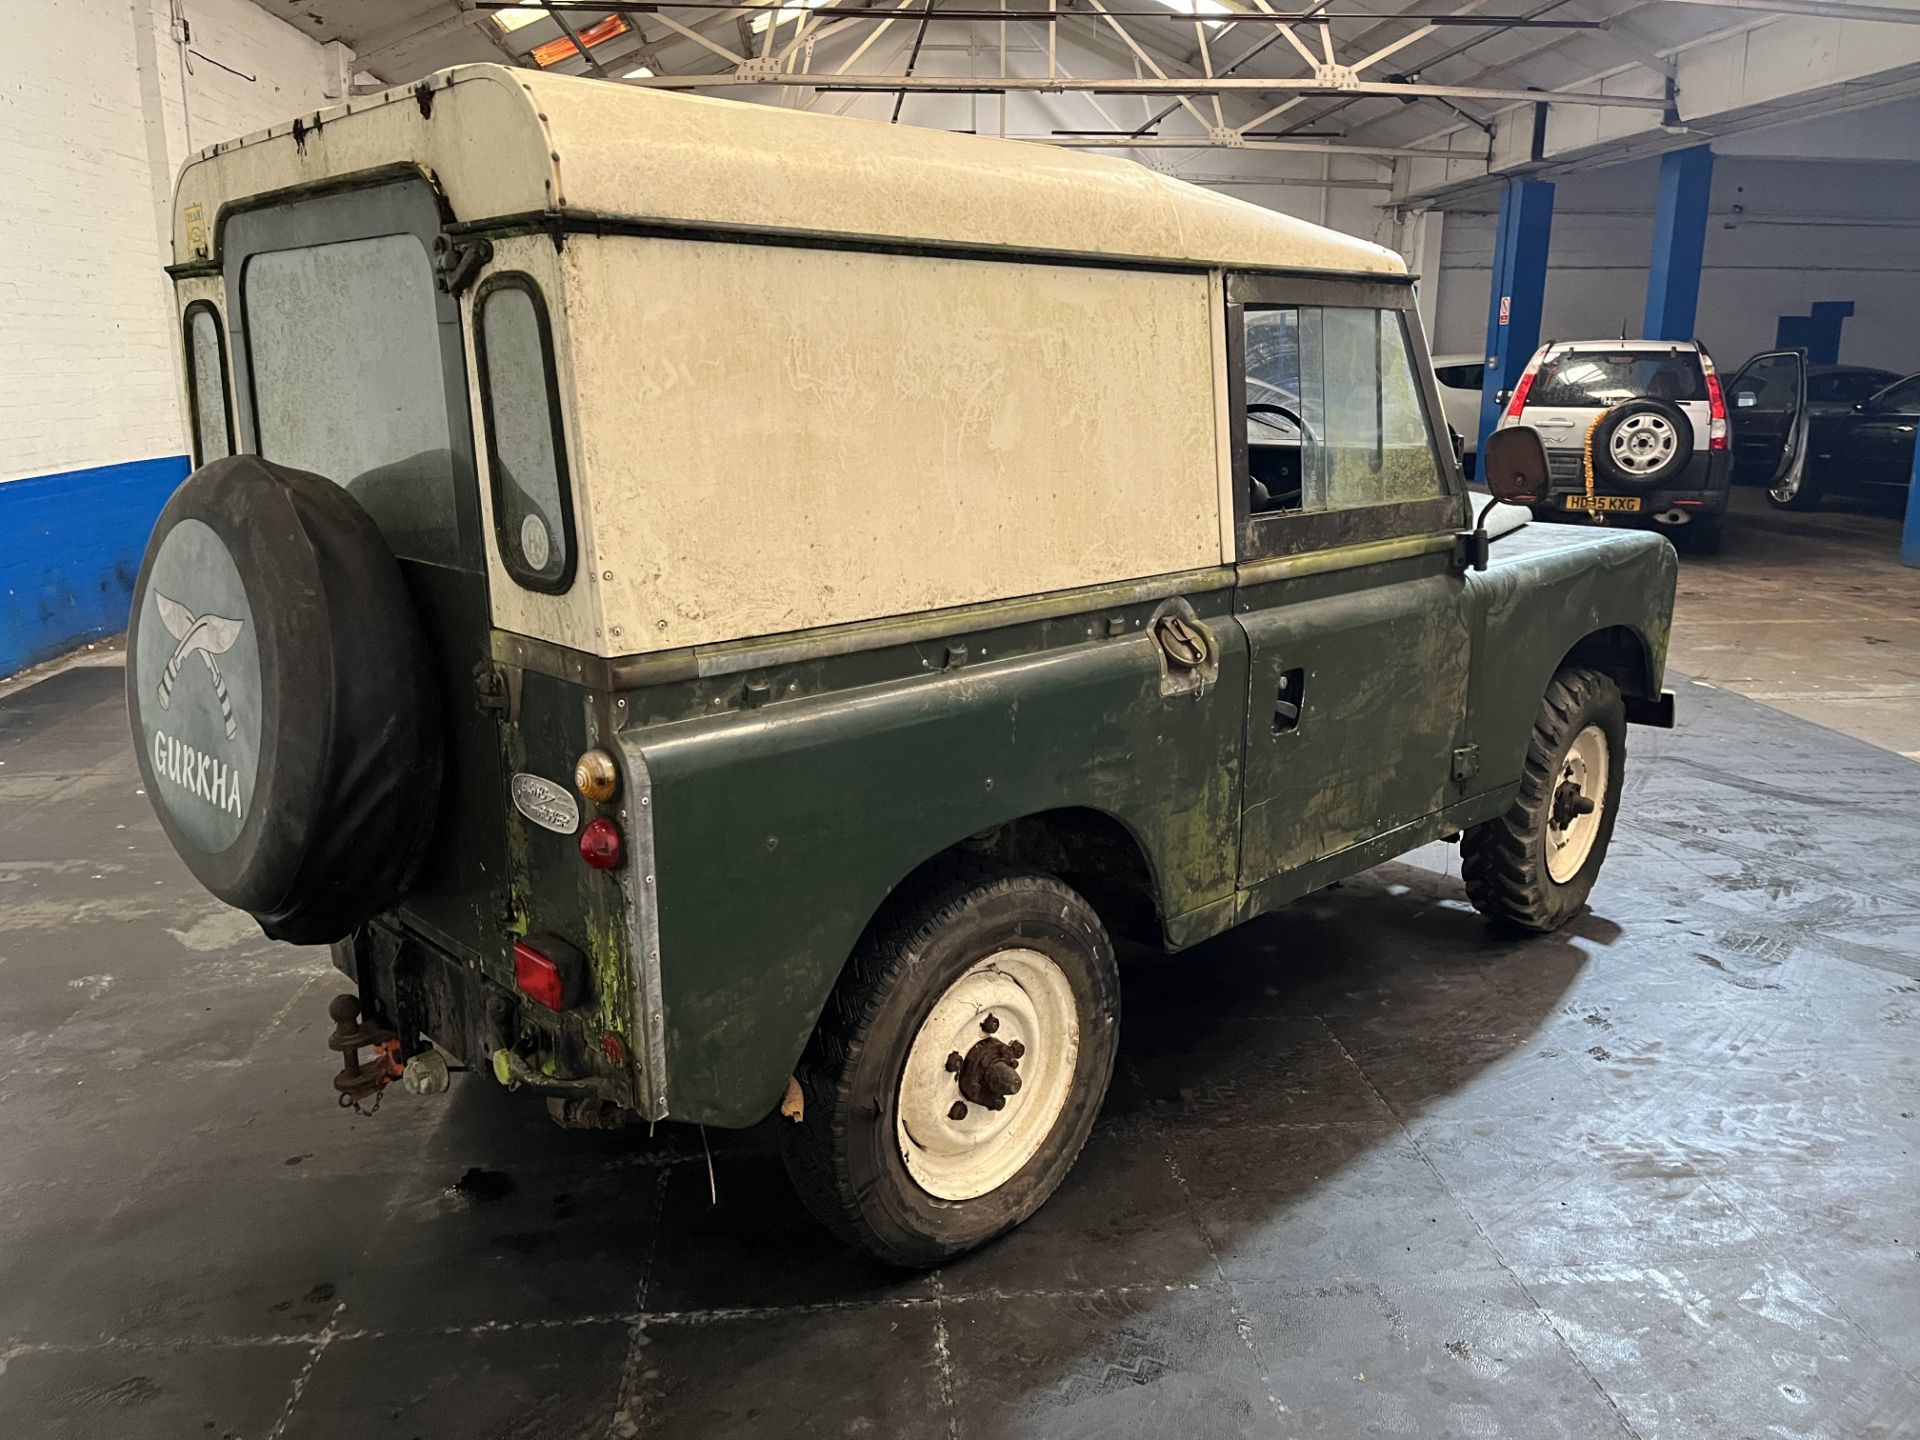 1983 Land Rover 88" - 4 CYL - 2286cc - Image 6 of 16